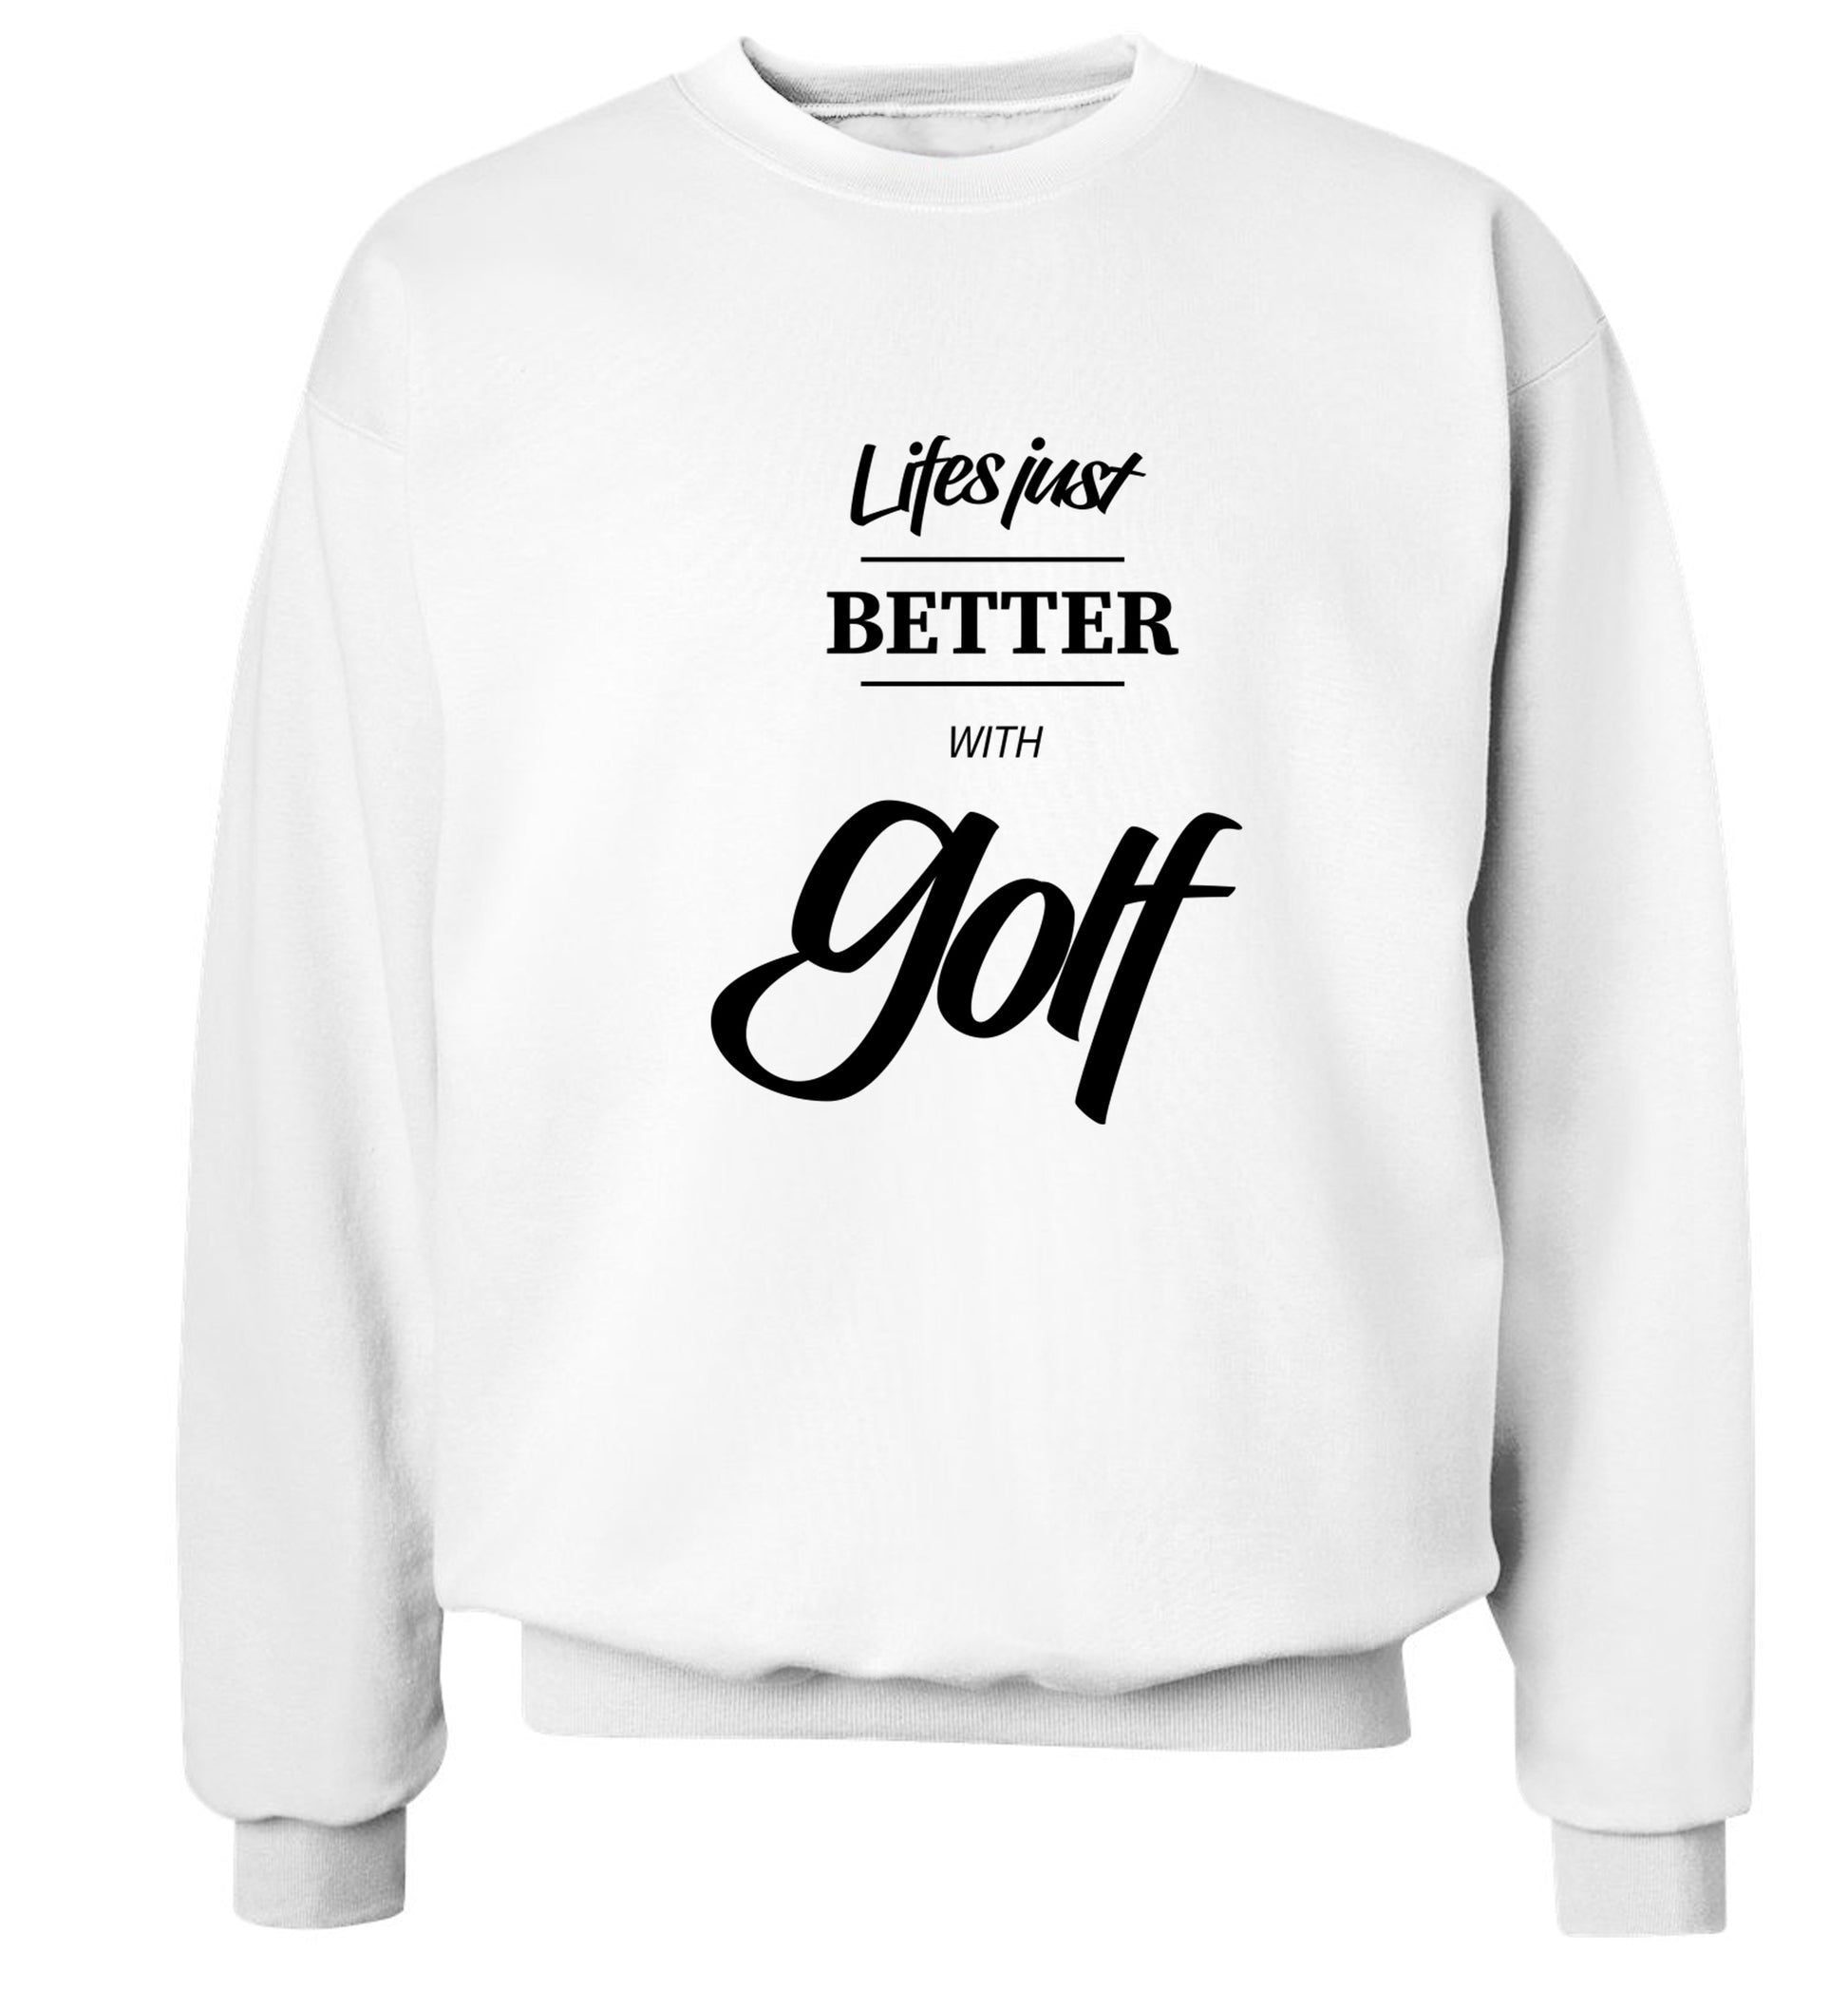 Life is better with golf Adult's unisex white Sweater 2XL